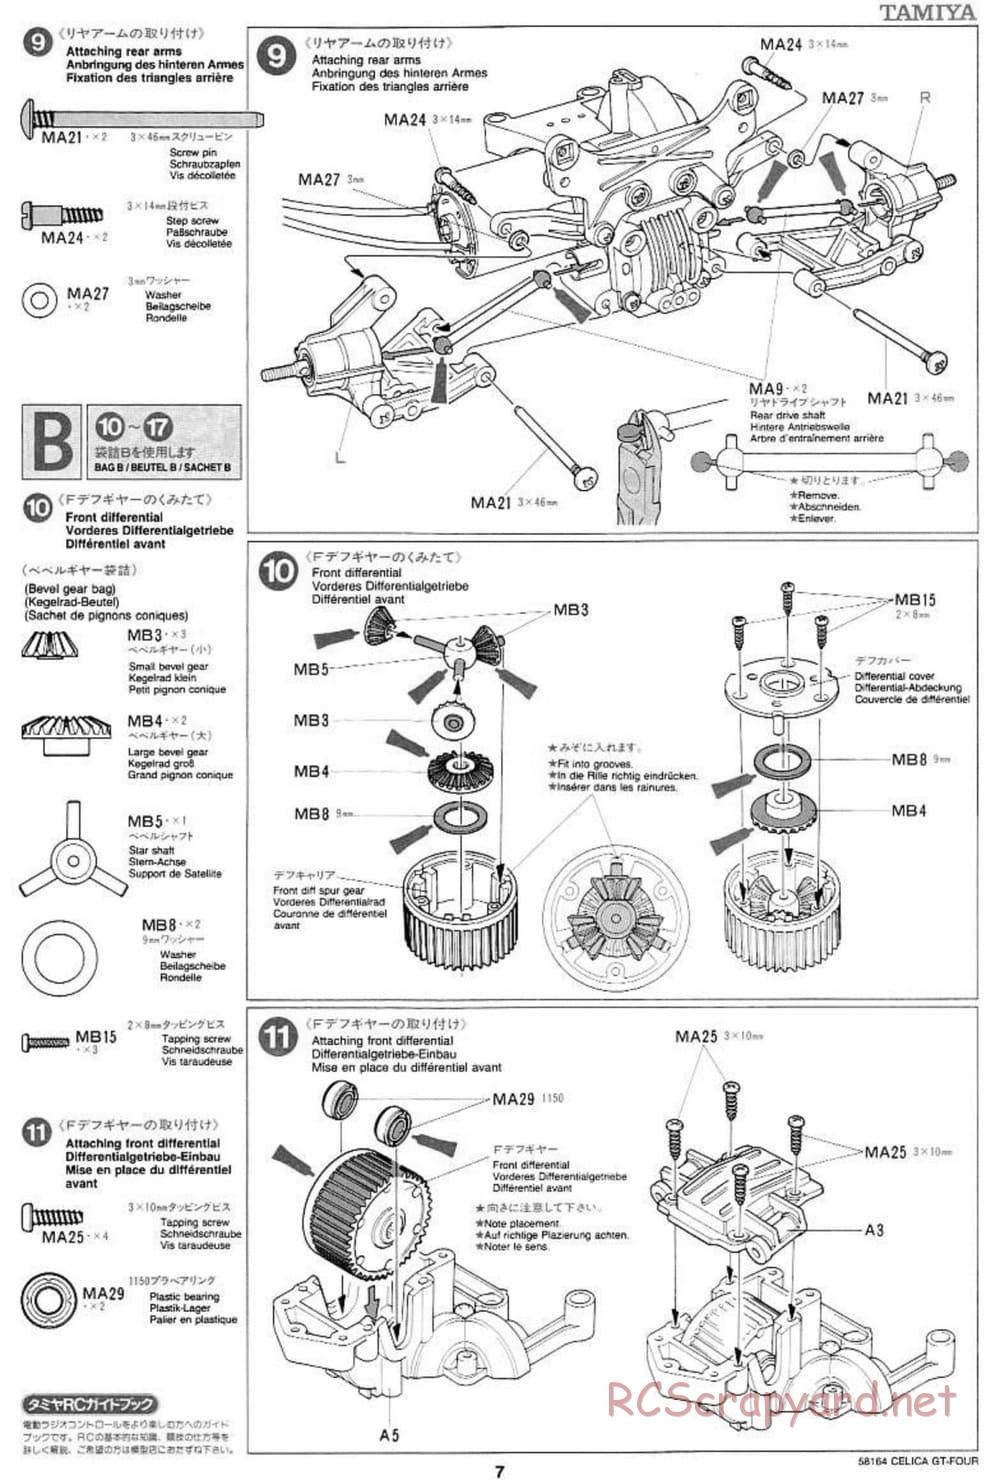 Tamiya - Toyota Celica GT Four - TA-02 Chassis - Manual - Page 7